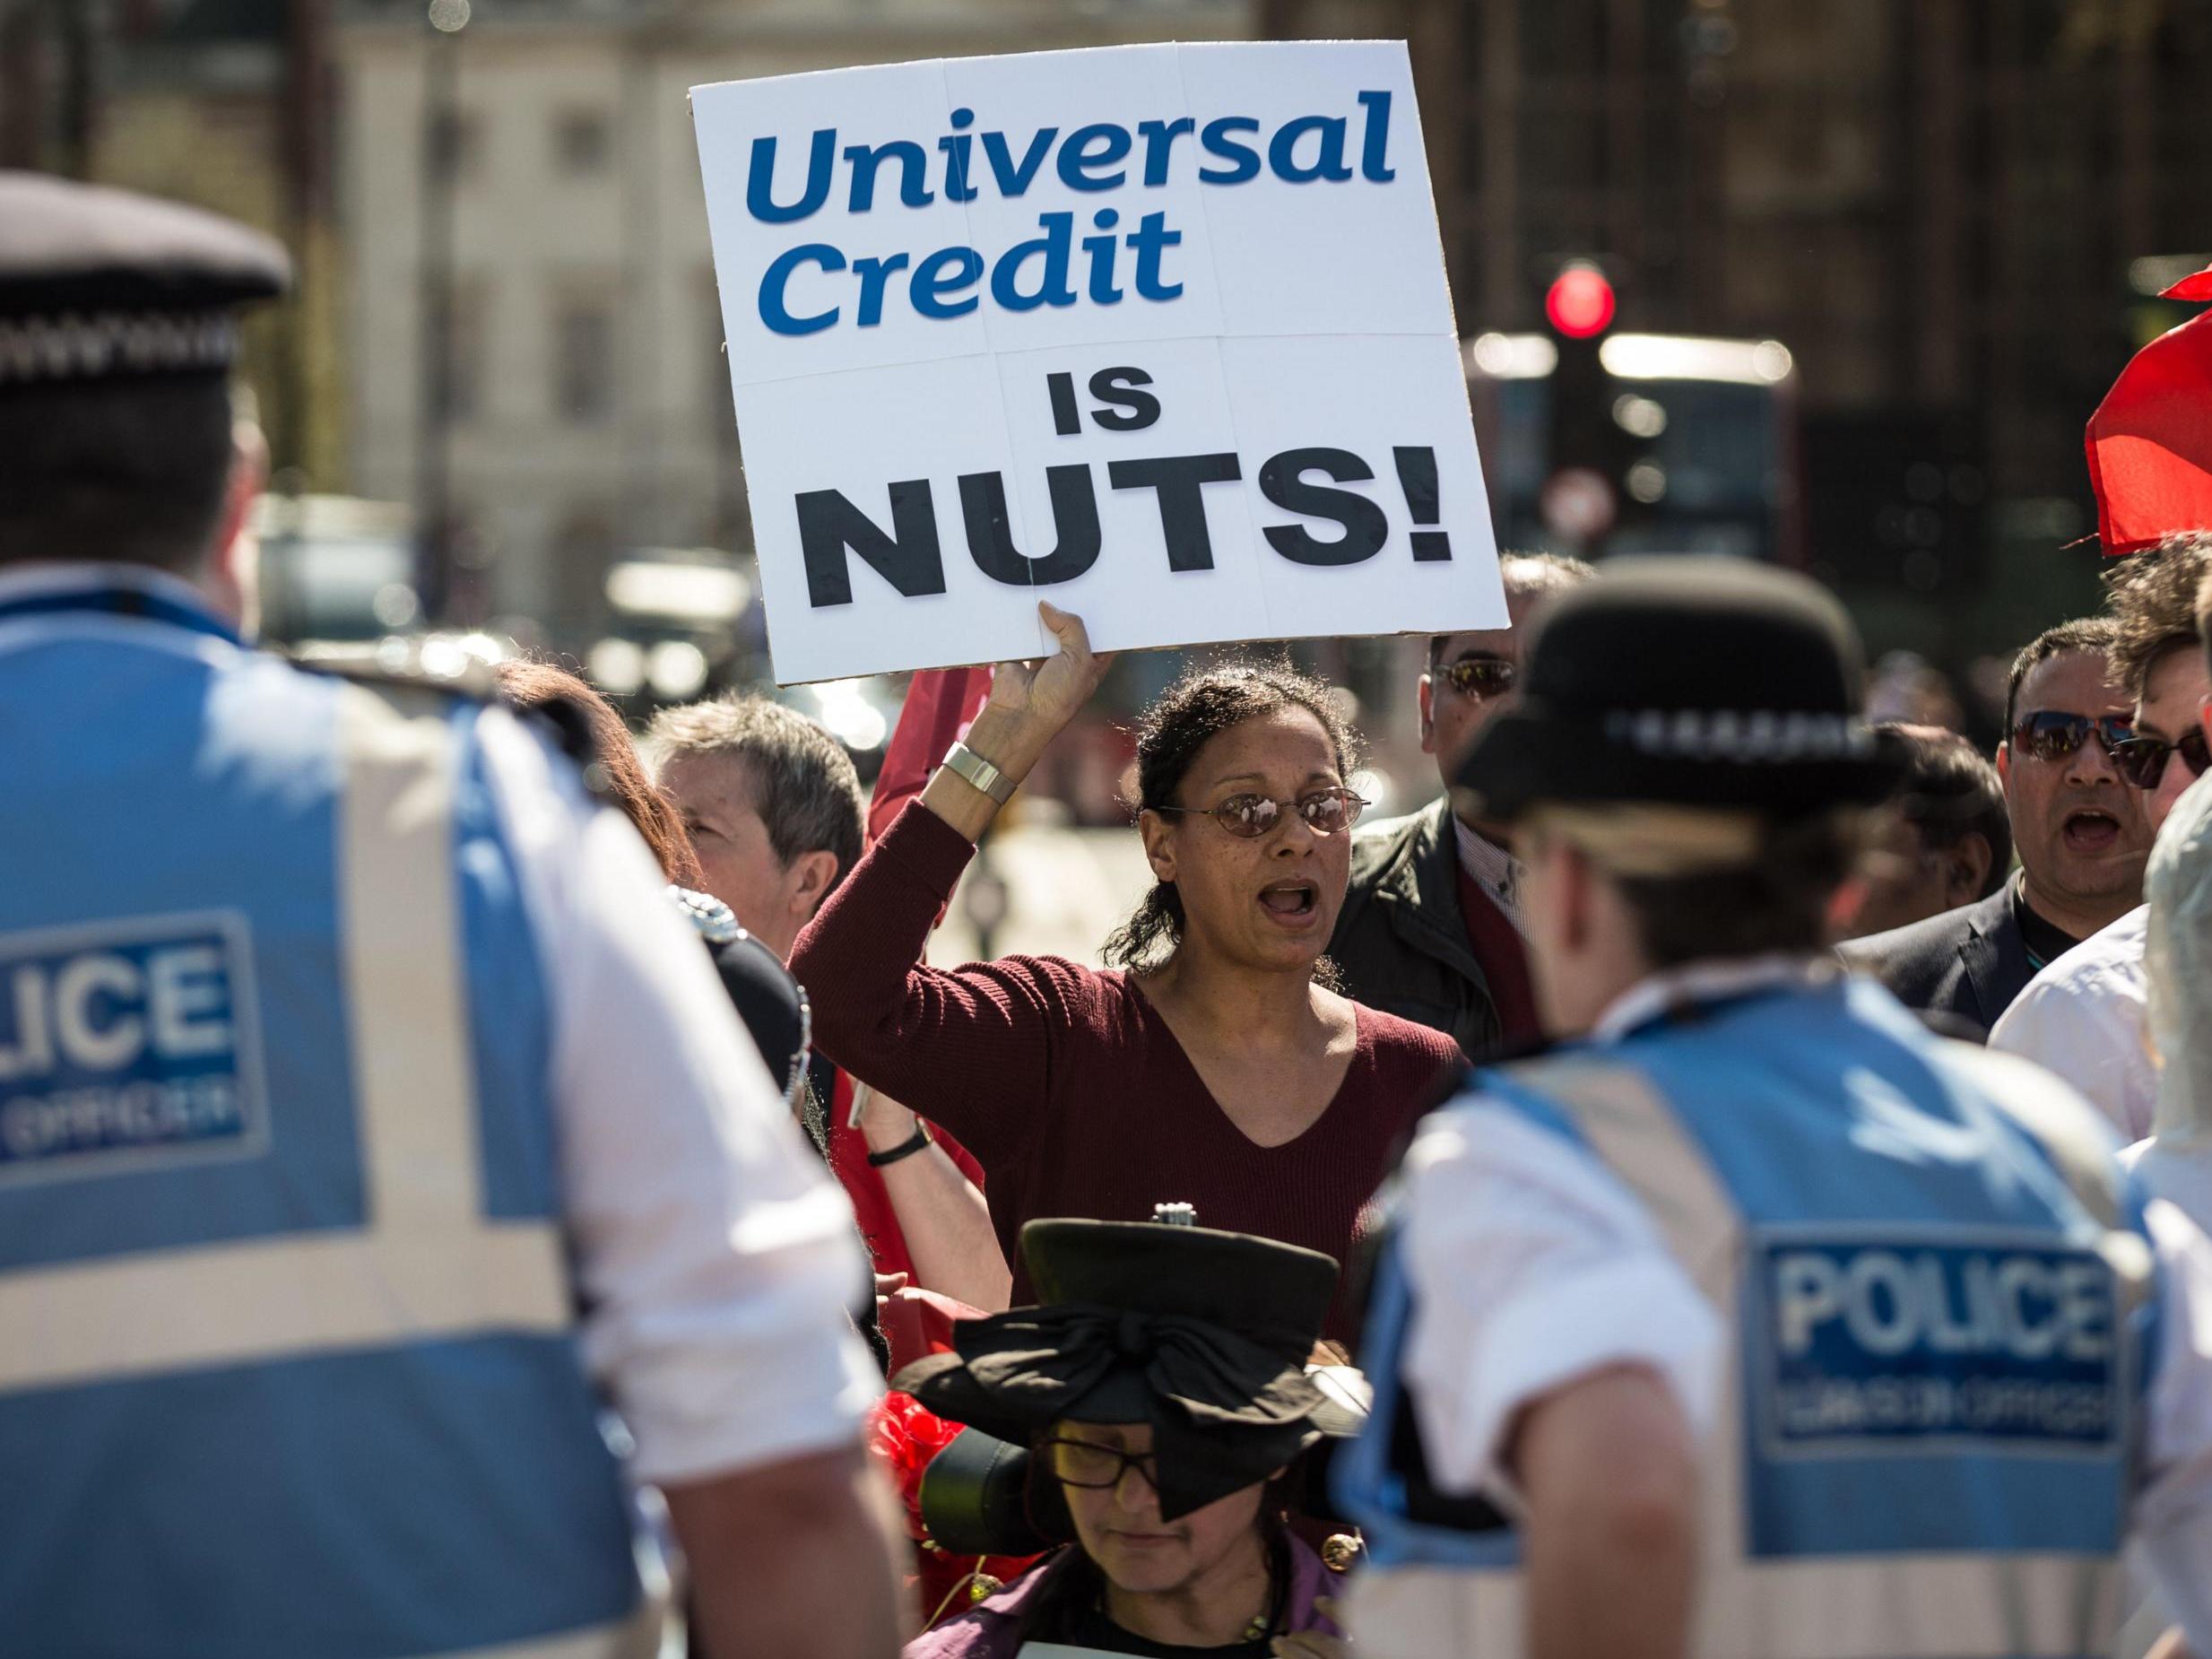 Campaigners have fought against a universal credit roll-out beset by problems